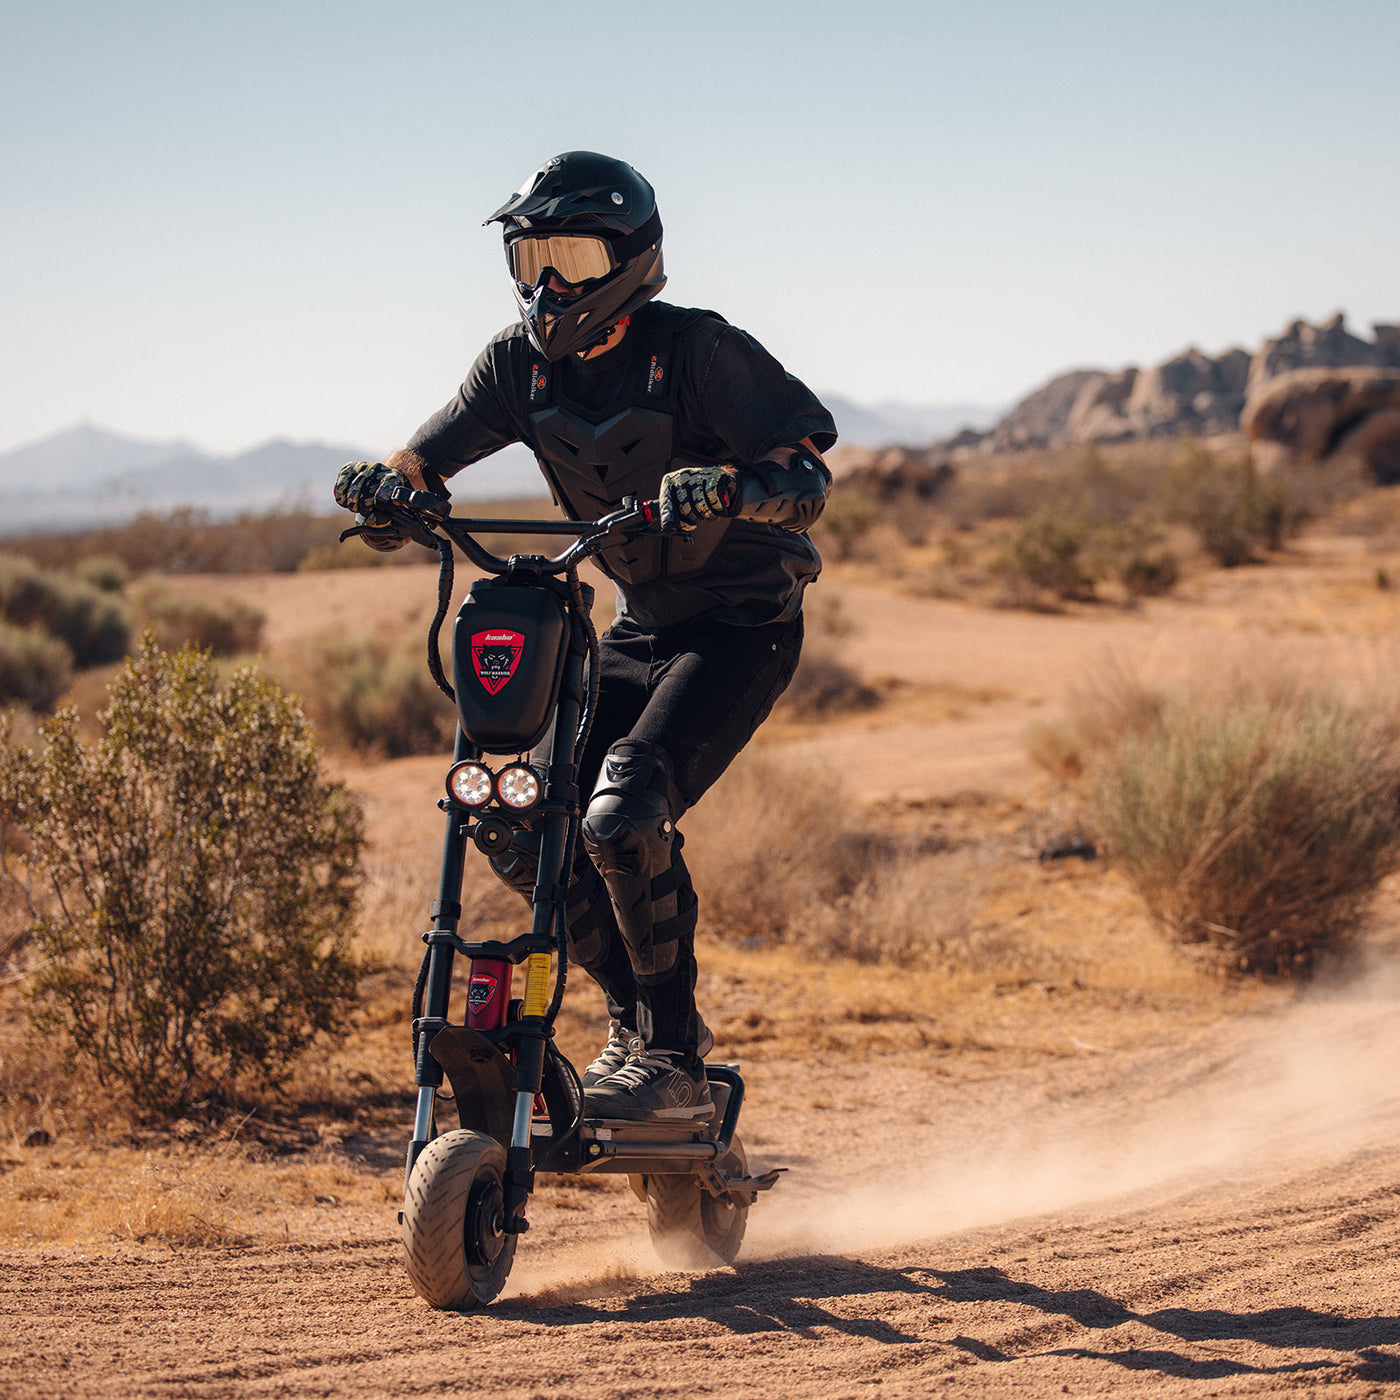 Adventurous rider tackling a dusty trail on the Kaabo Wolf Warrior 11 Pro+ electric scooter, showcasing its dust-kicking power and rugged outdoor performance.